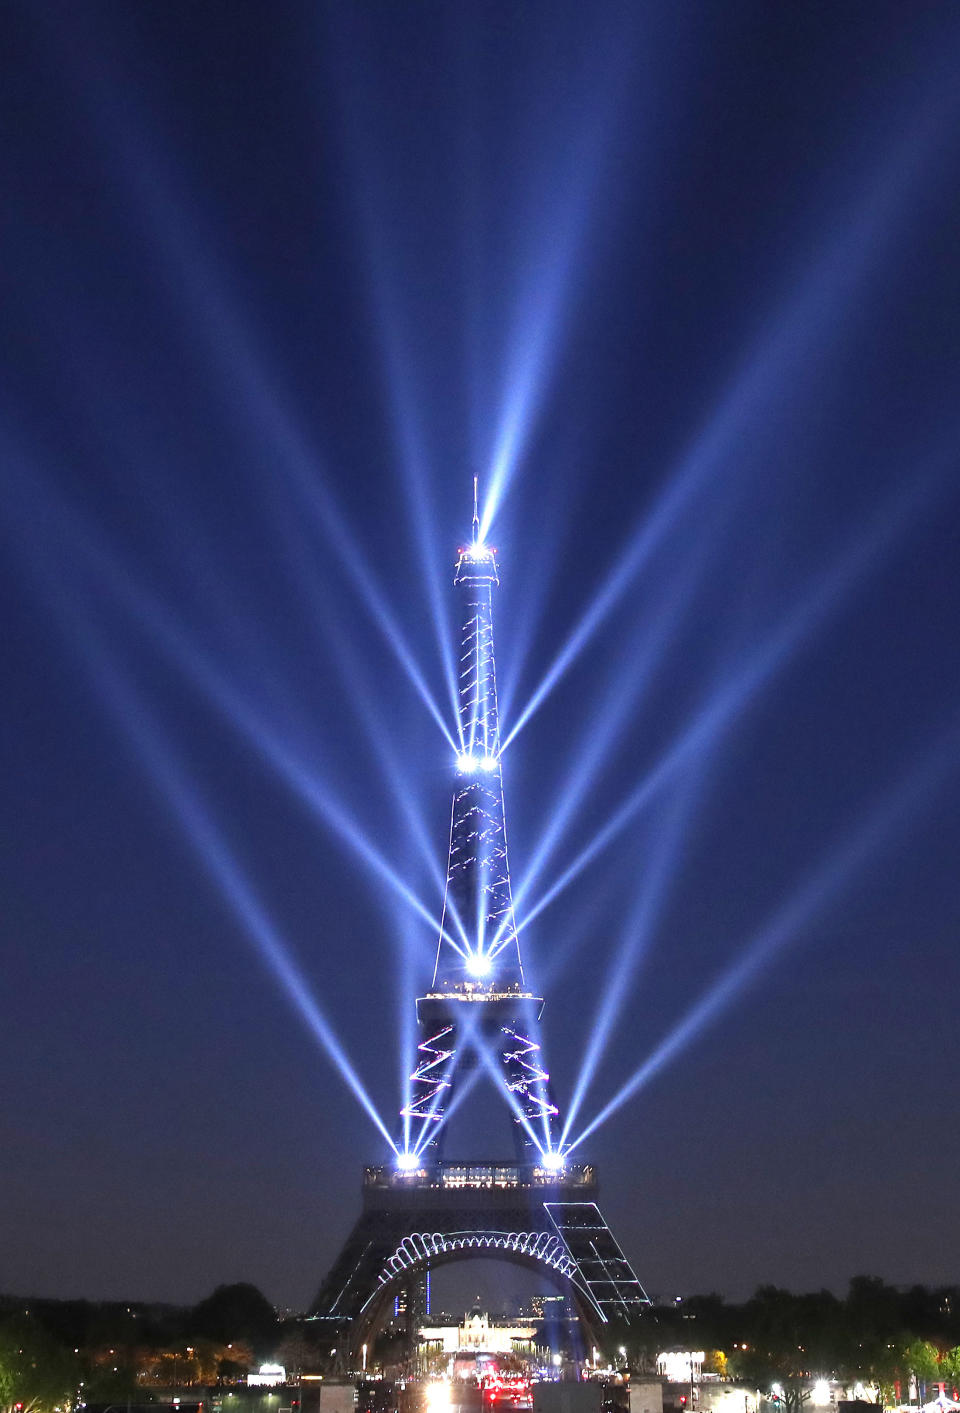 A light show illuminates the Eiffel Tower for its 130 year anniversary, in Paris, Wednesday, May 15, 2019. Paris is wishing the Eiffel Tower a happy birthday with an elaborate laser show retracing the monument's 130-year history. (AP Photo/Christophe Ena)